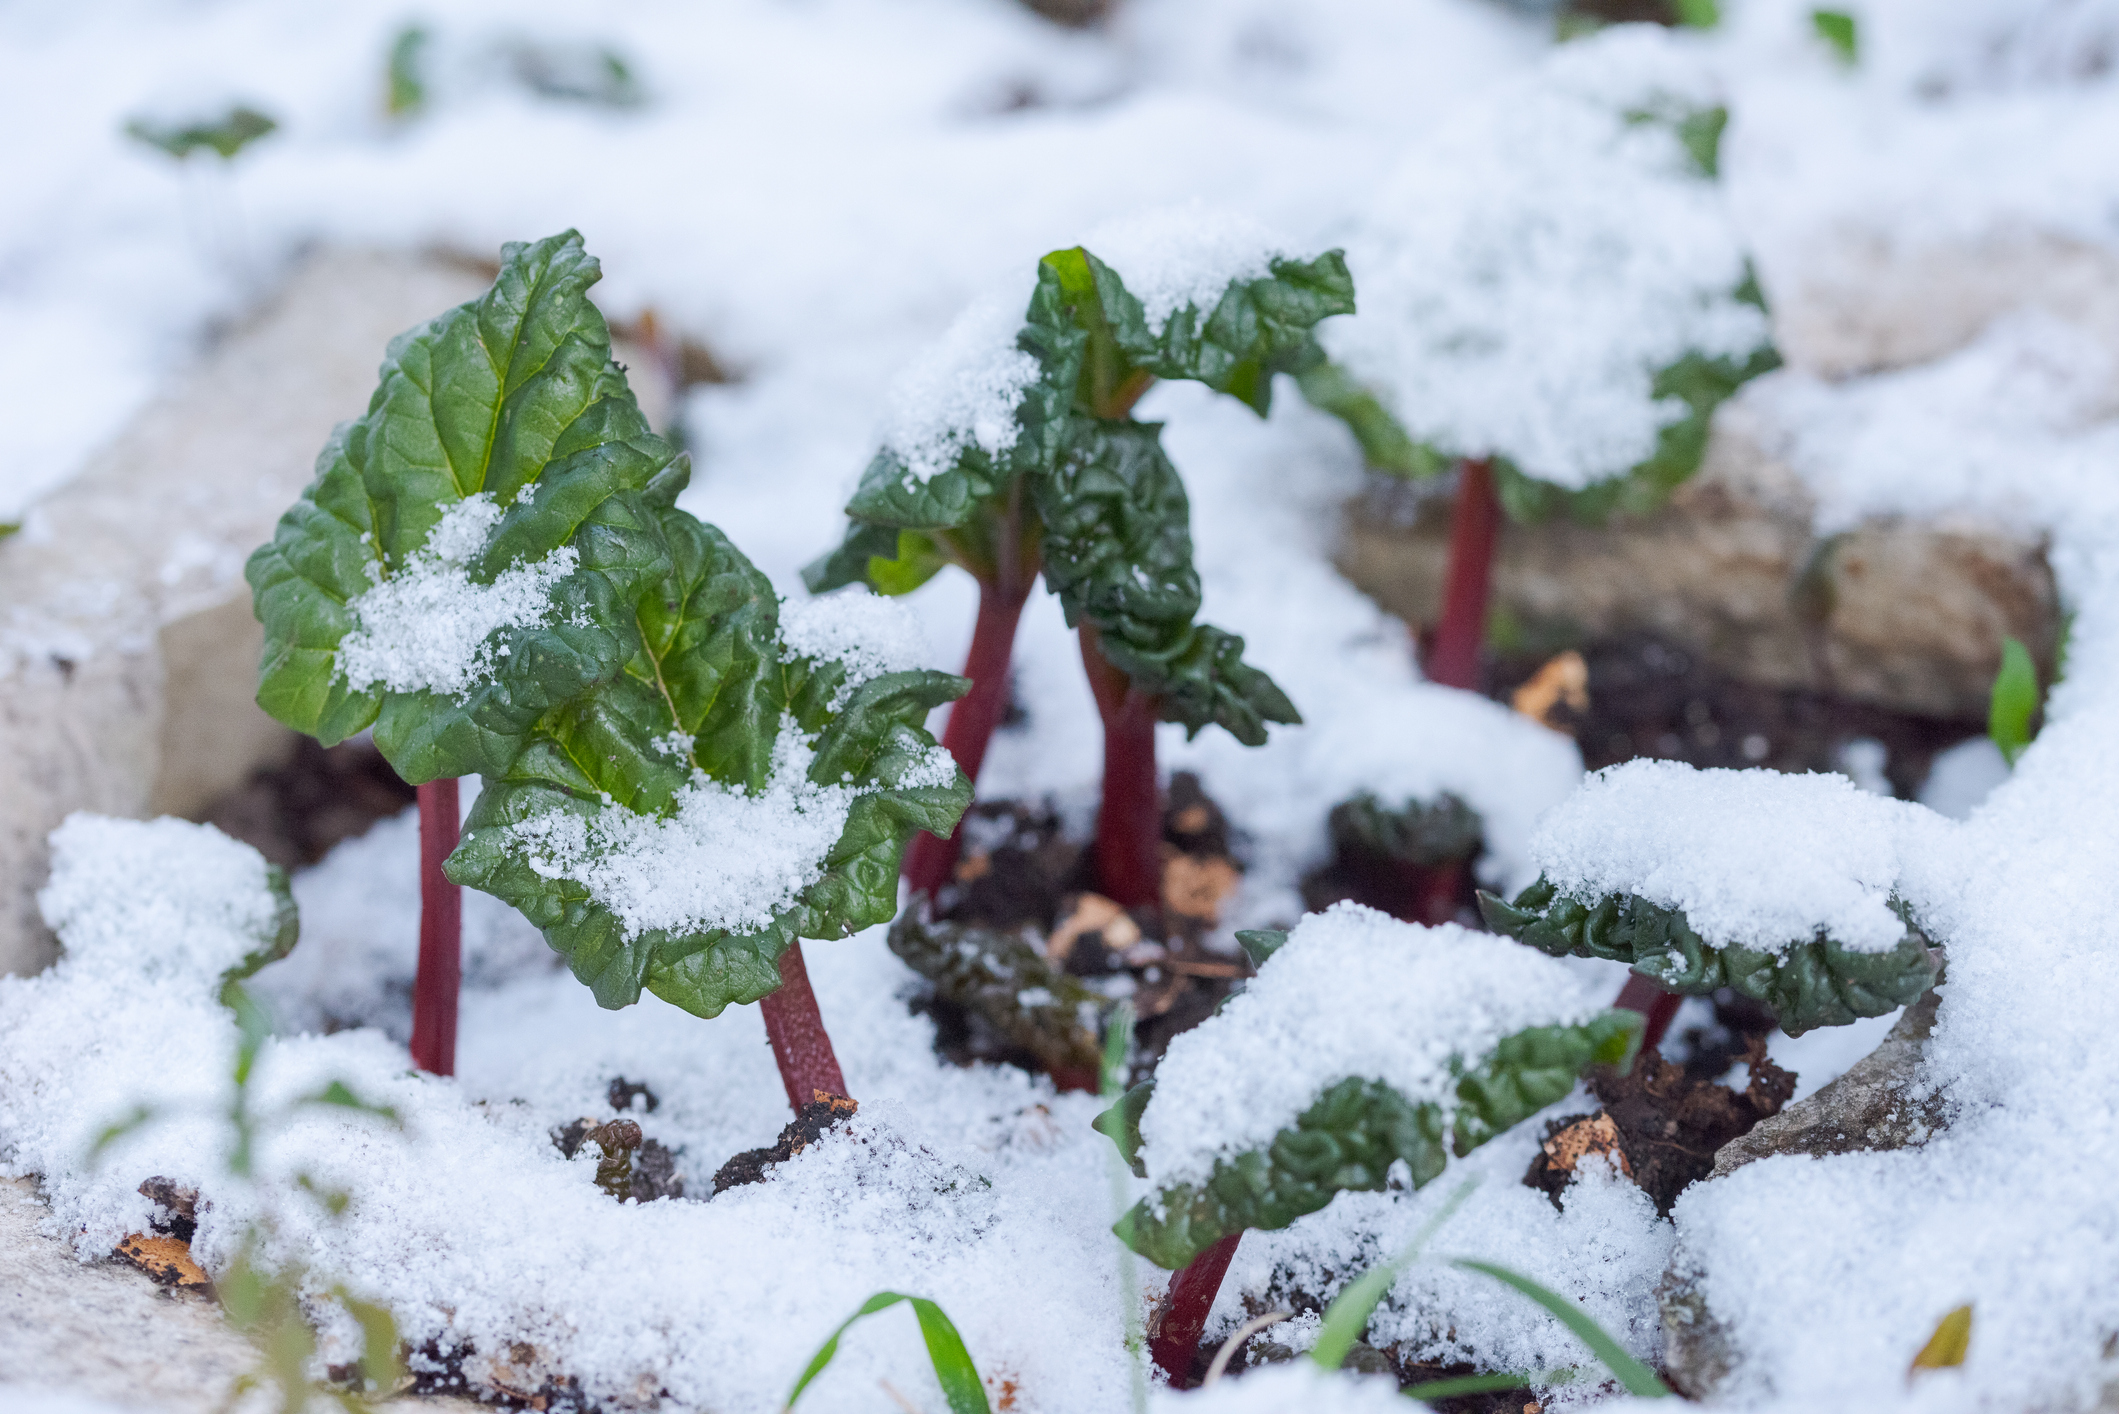 Small plants of garden rhubarb in garden capped with snow